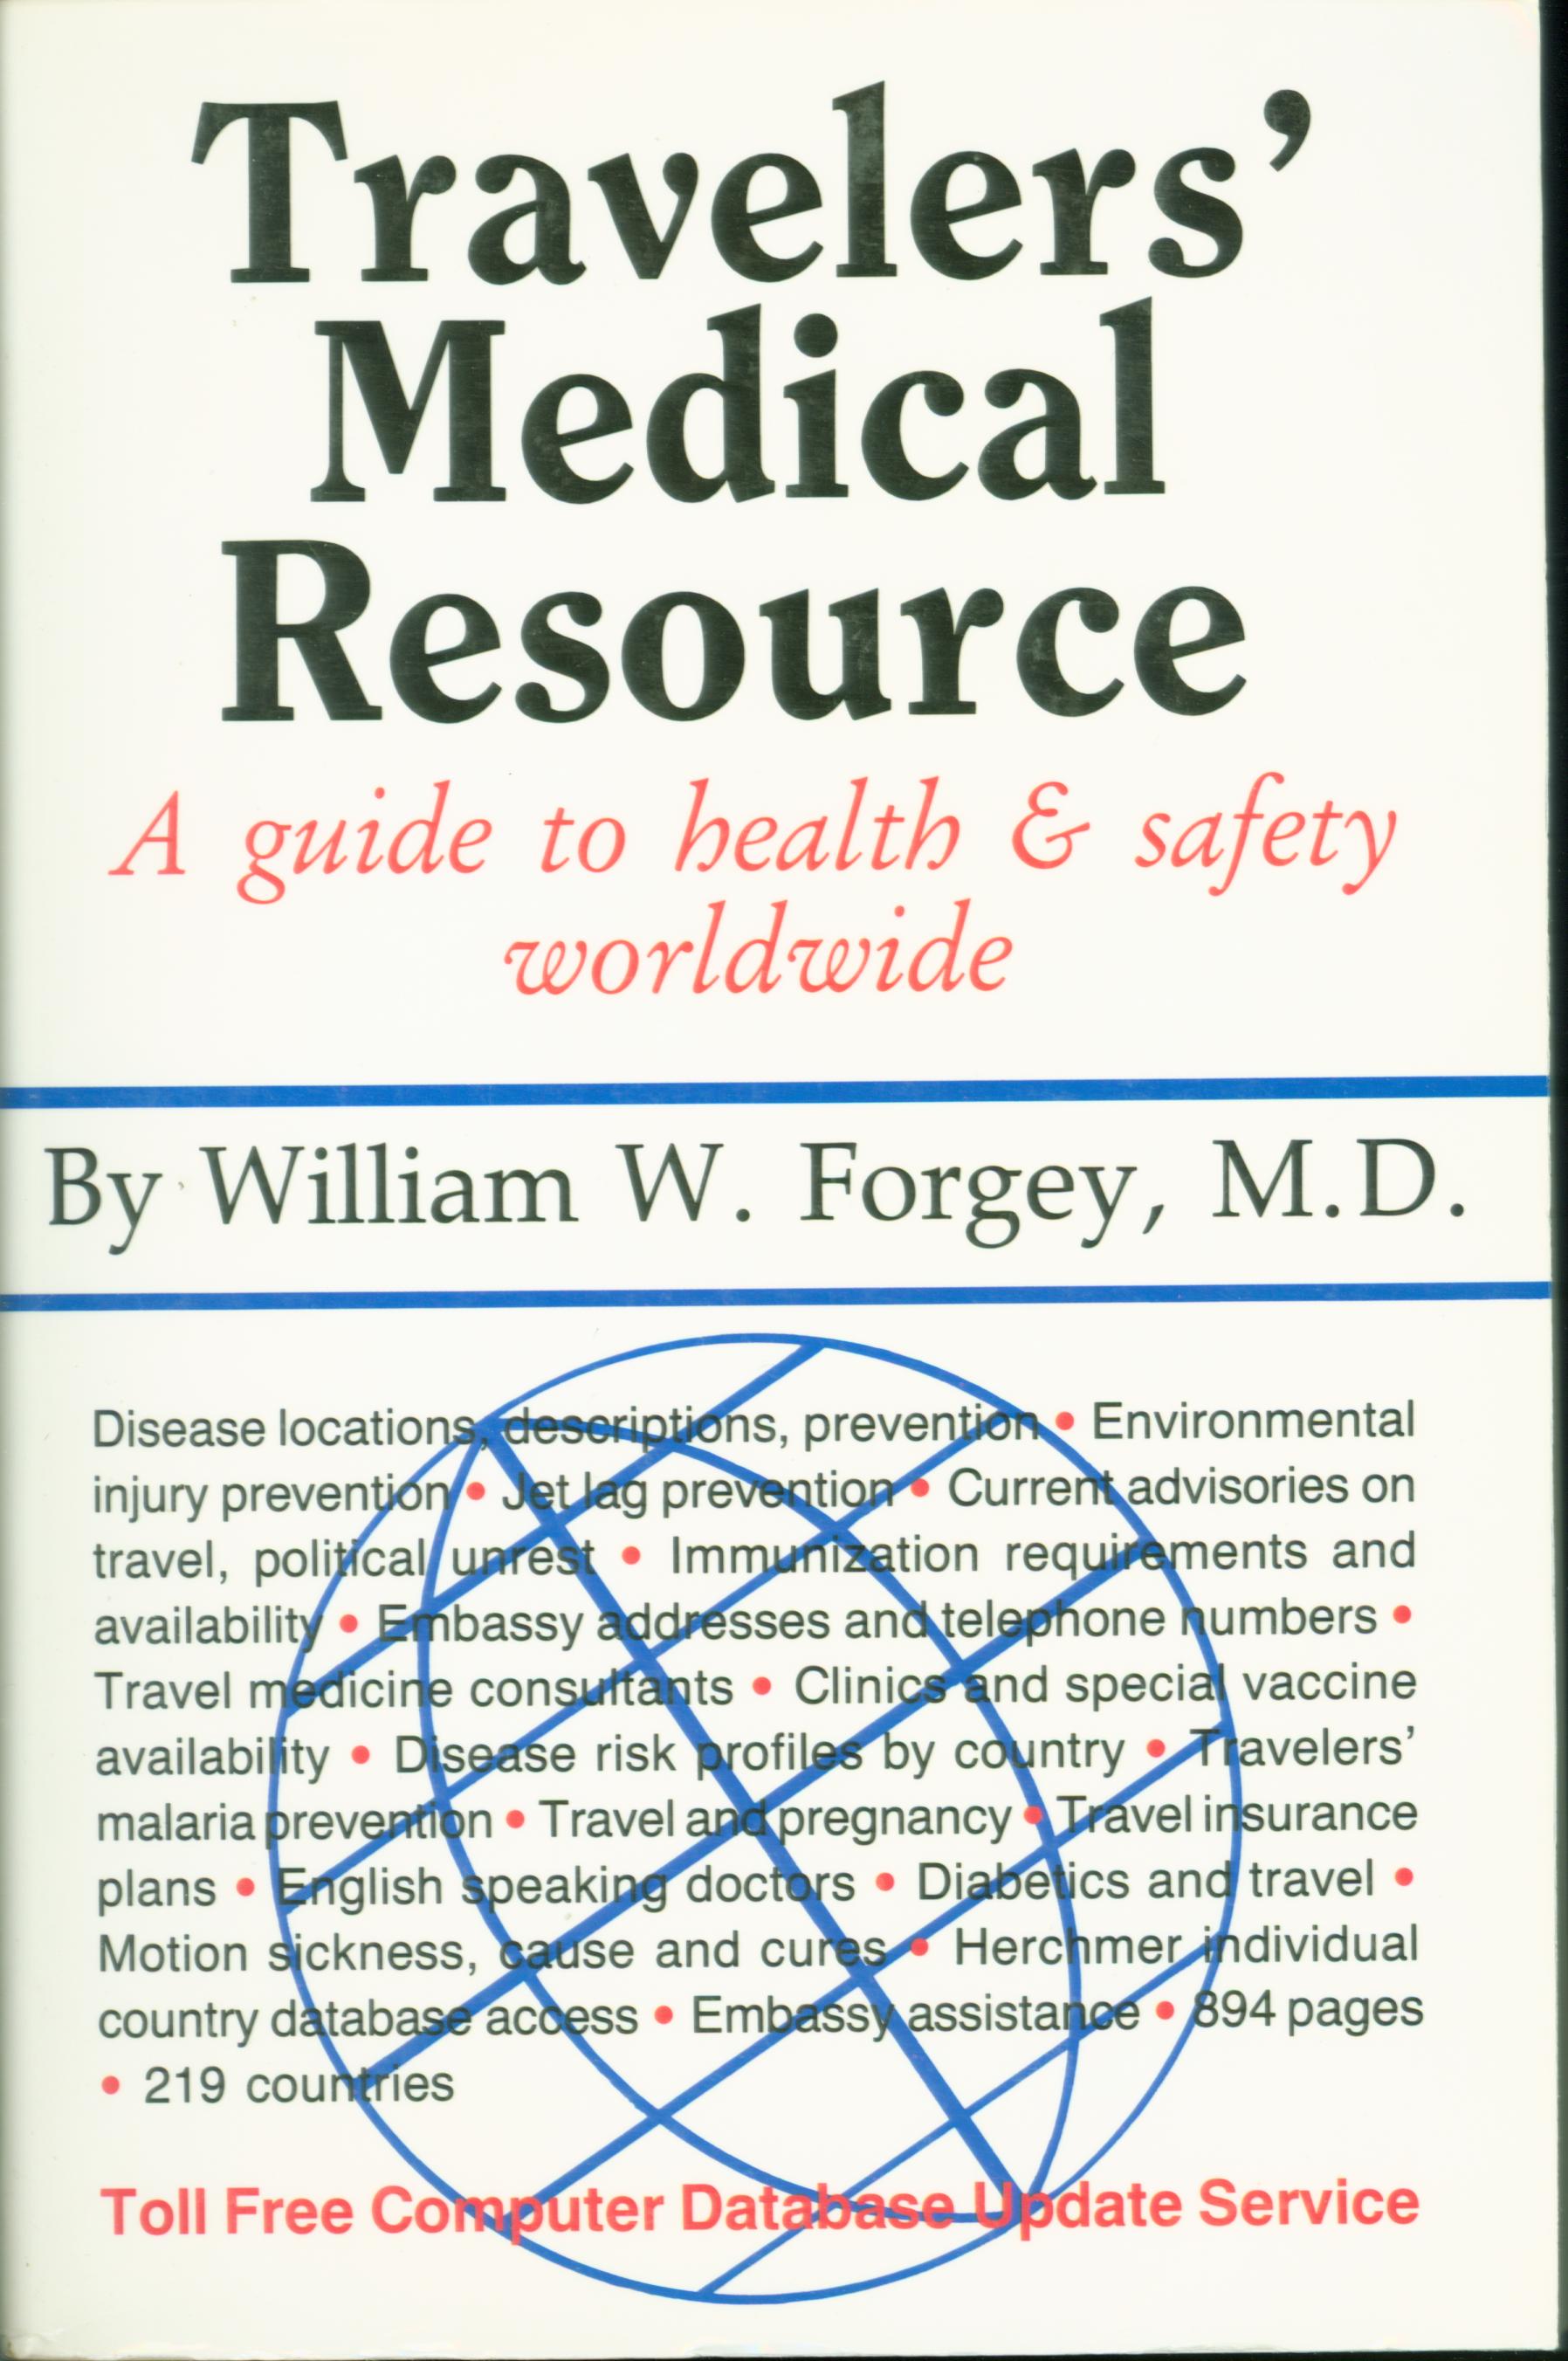 TRAVELERS'MEDICAL RESOURCE: a guide to health and safety worldwide.